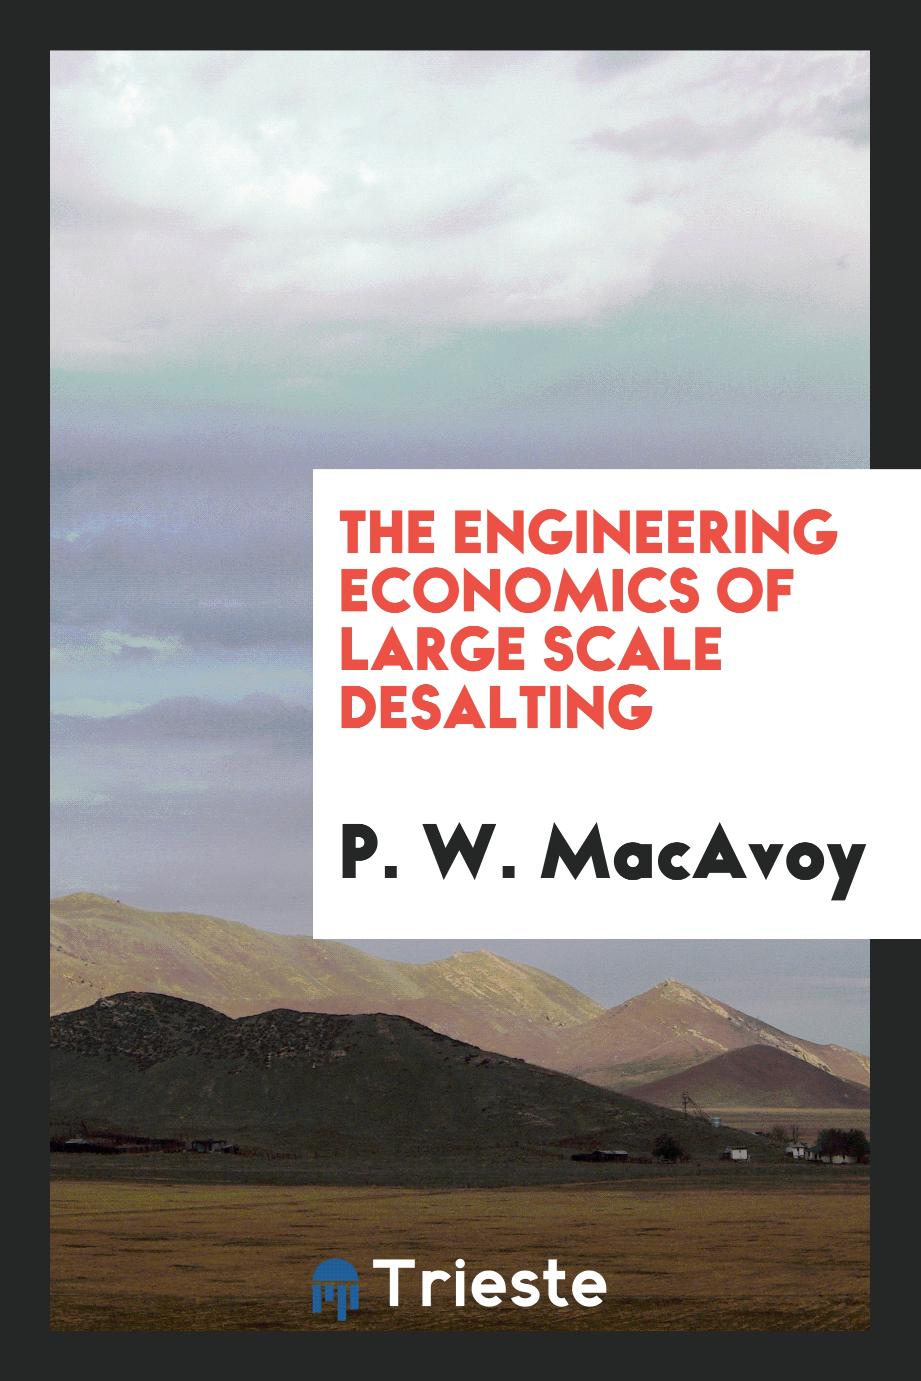 The engineering economics of large scale desalting